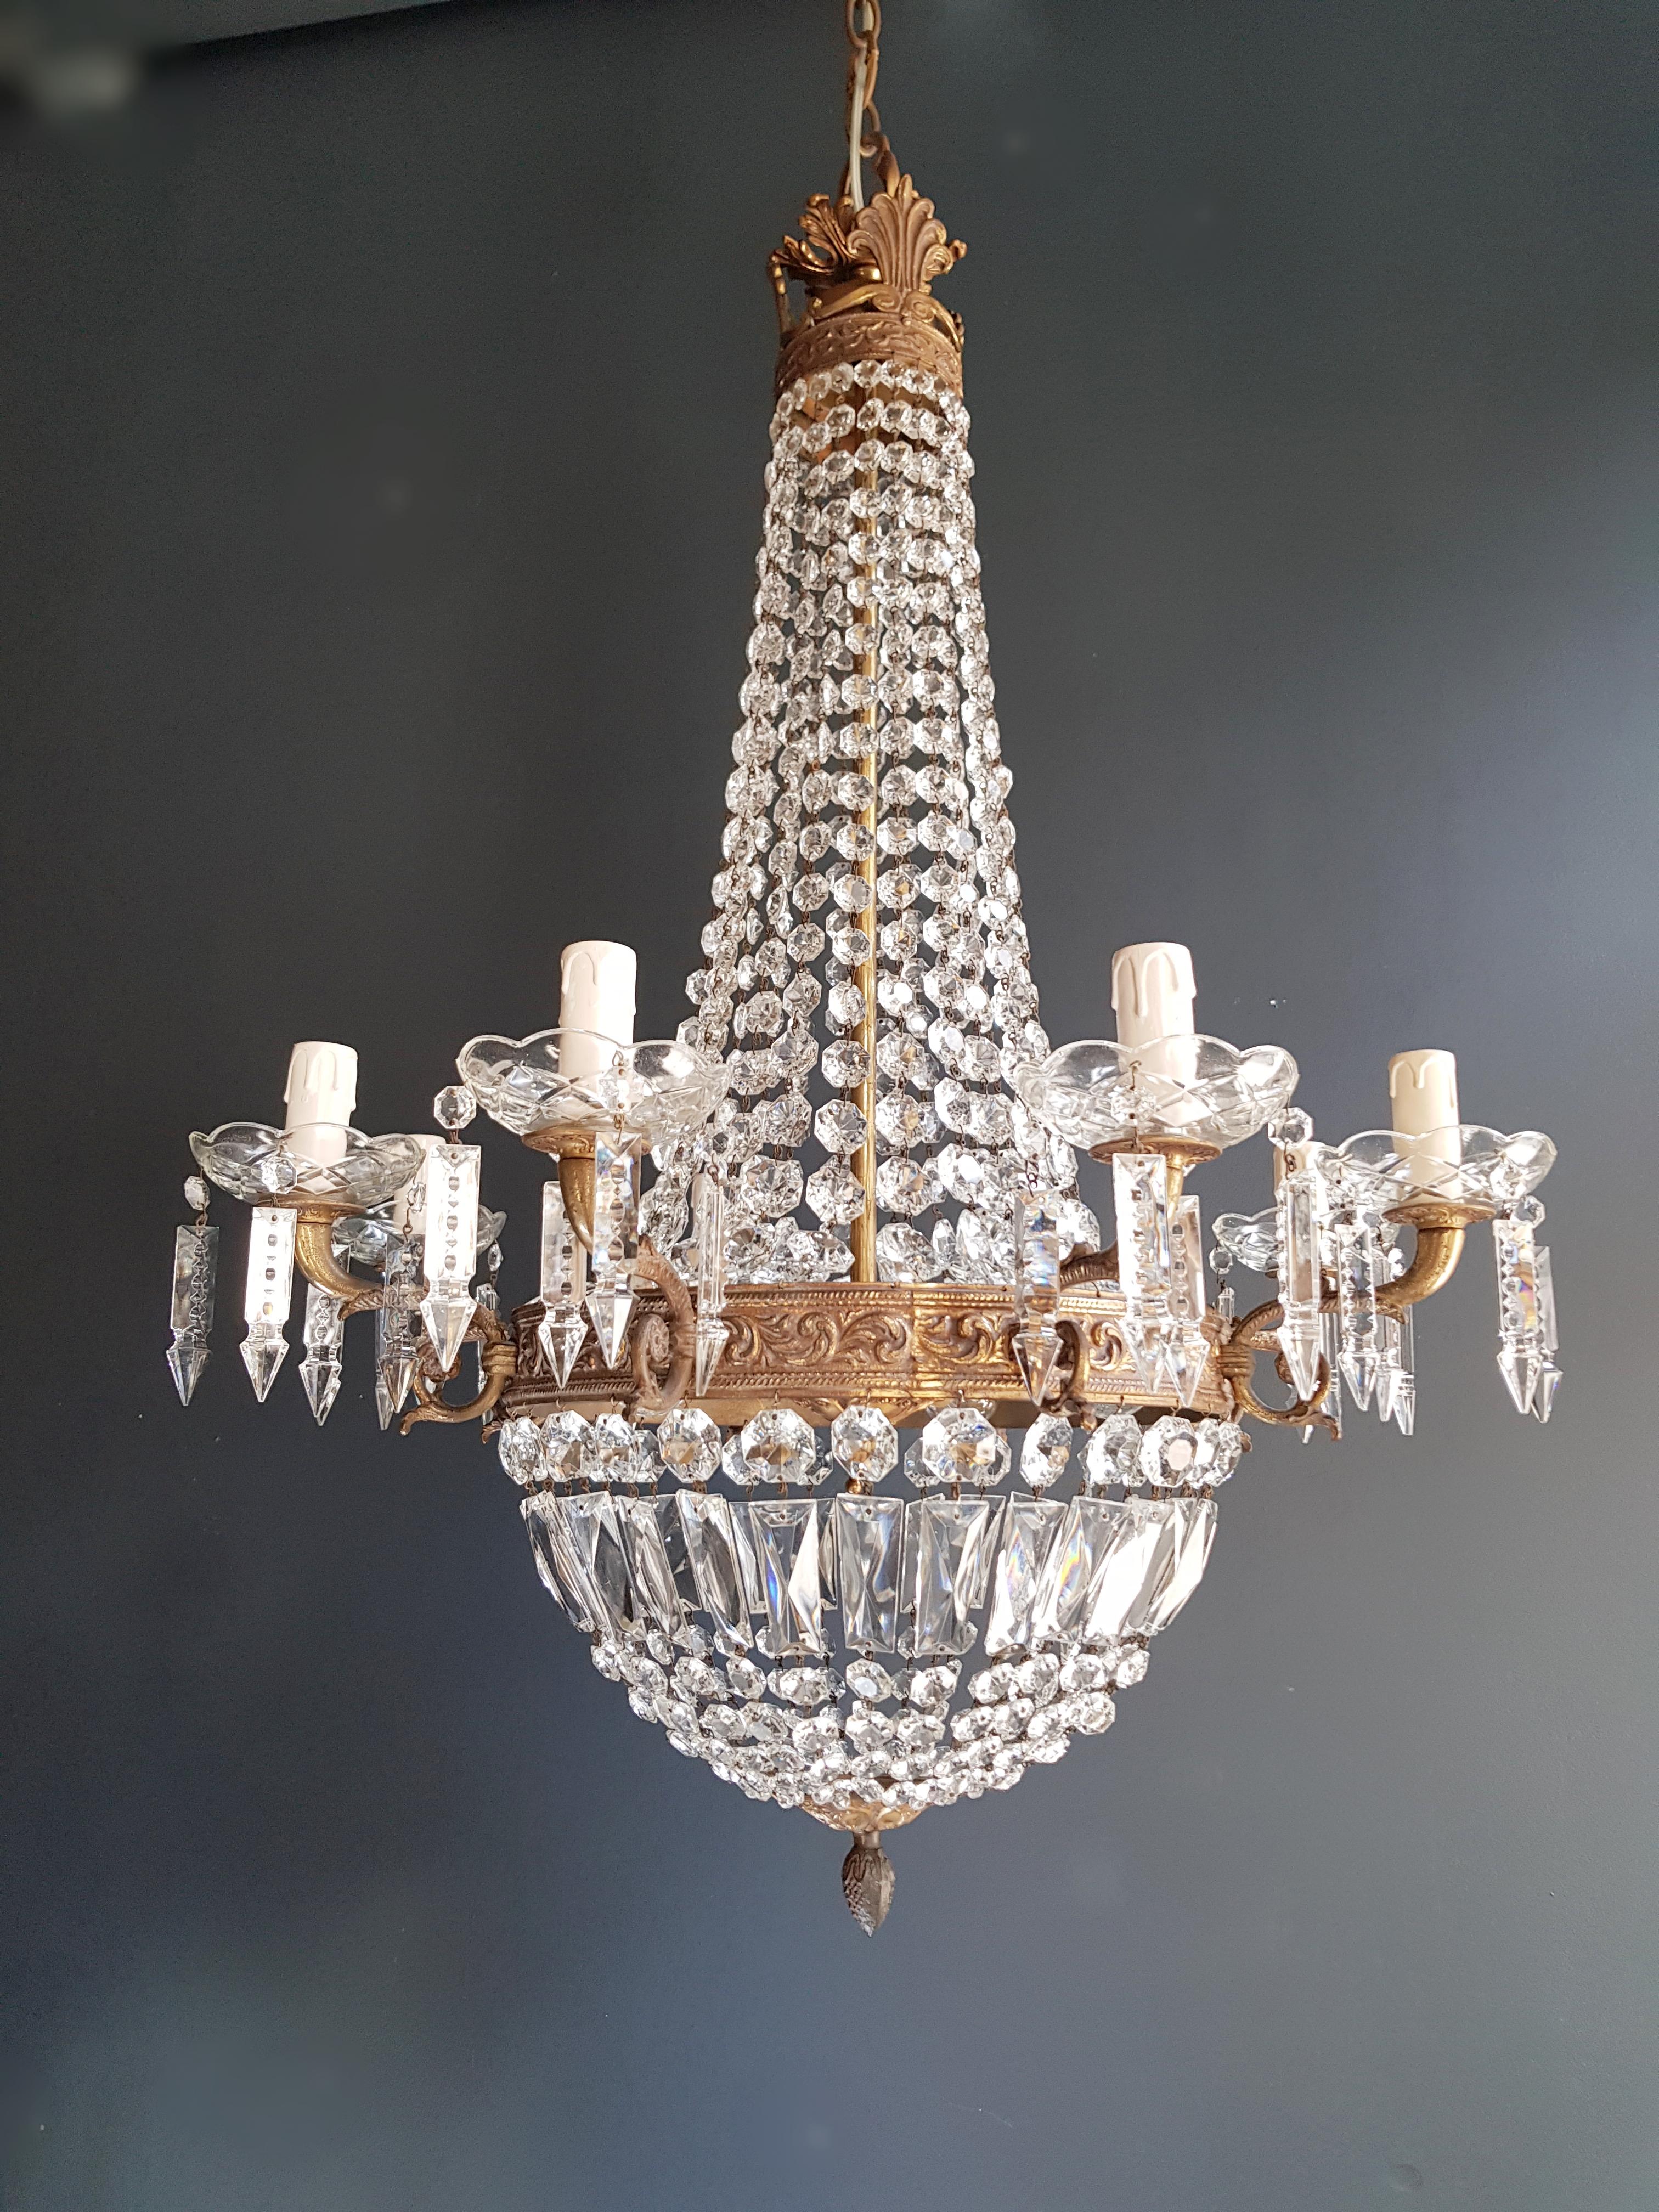 18th Century and Earlier Montgolfiè Empire Sac a Pearl Chandelier Crystal Lustre Ceiling Lamp Antique WoW